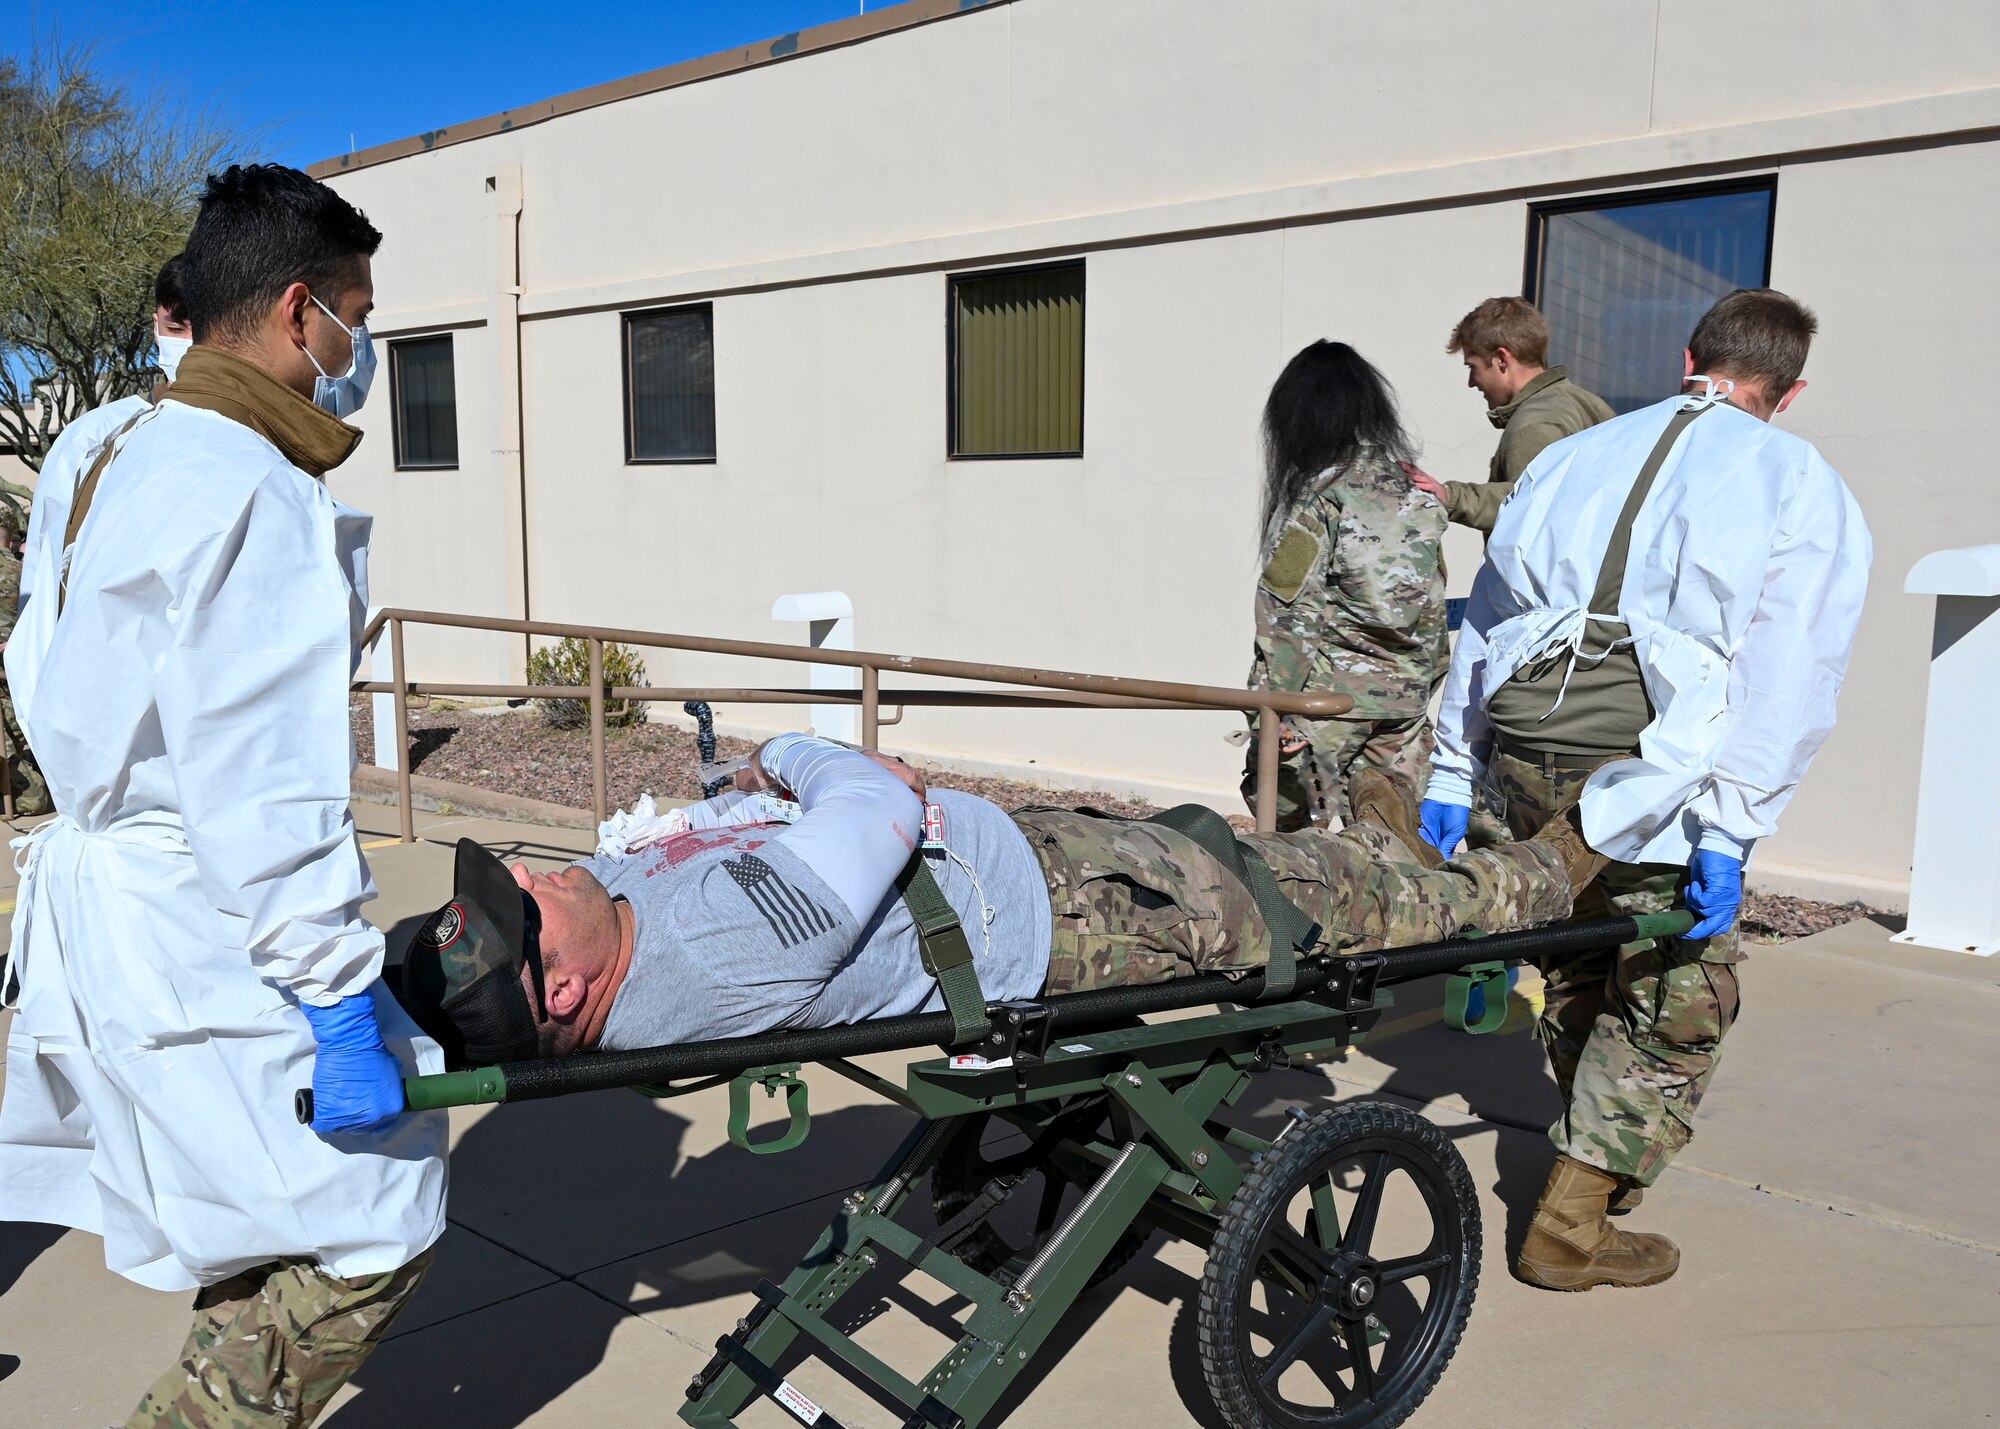 Airmen transport a simulated casualty on a stretcher during a mass casualty training exercise at Davis-Monthan Air Force Base